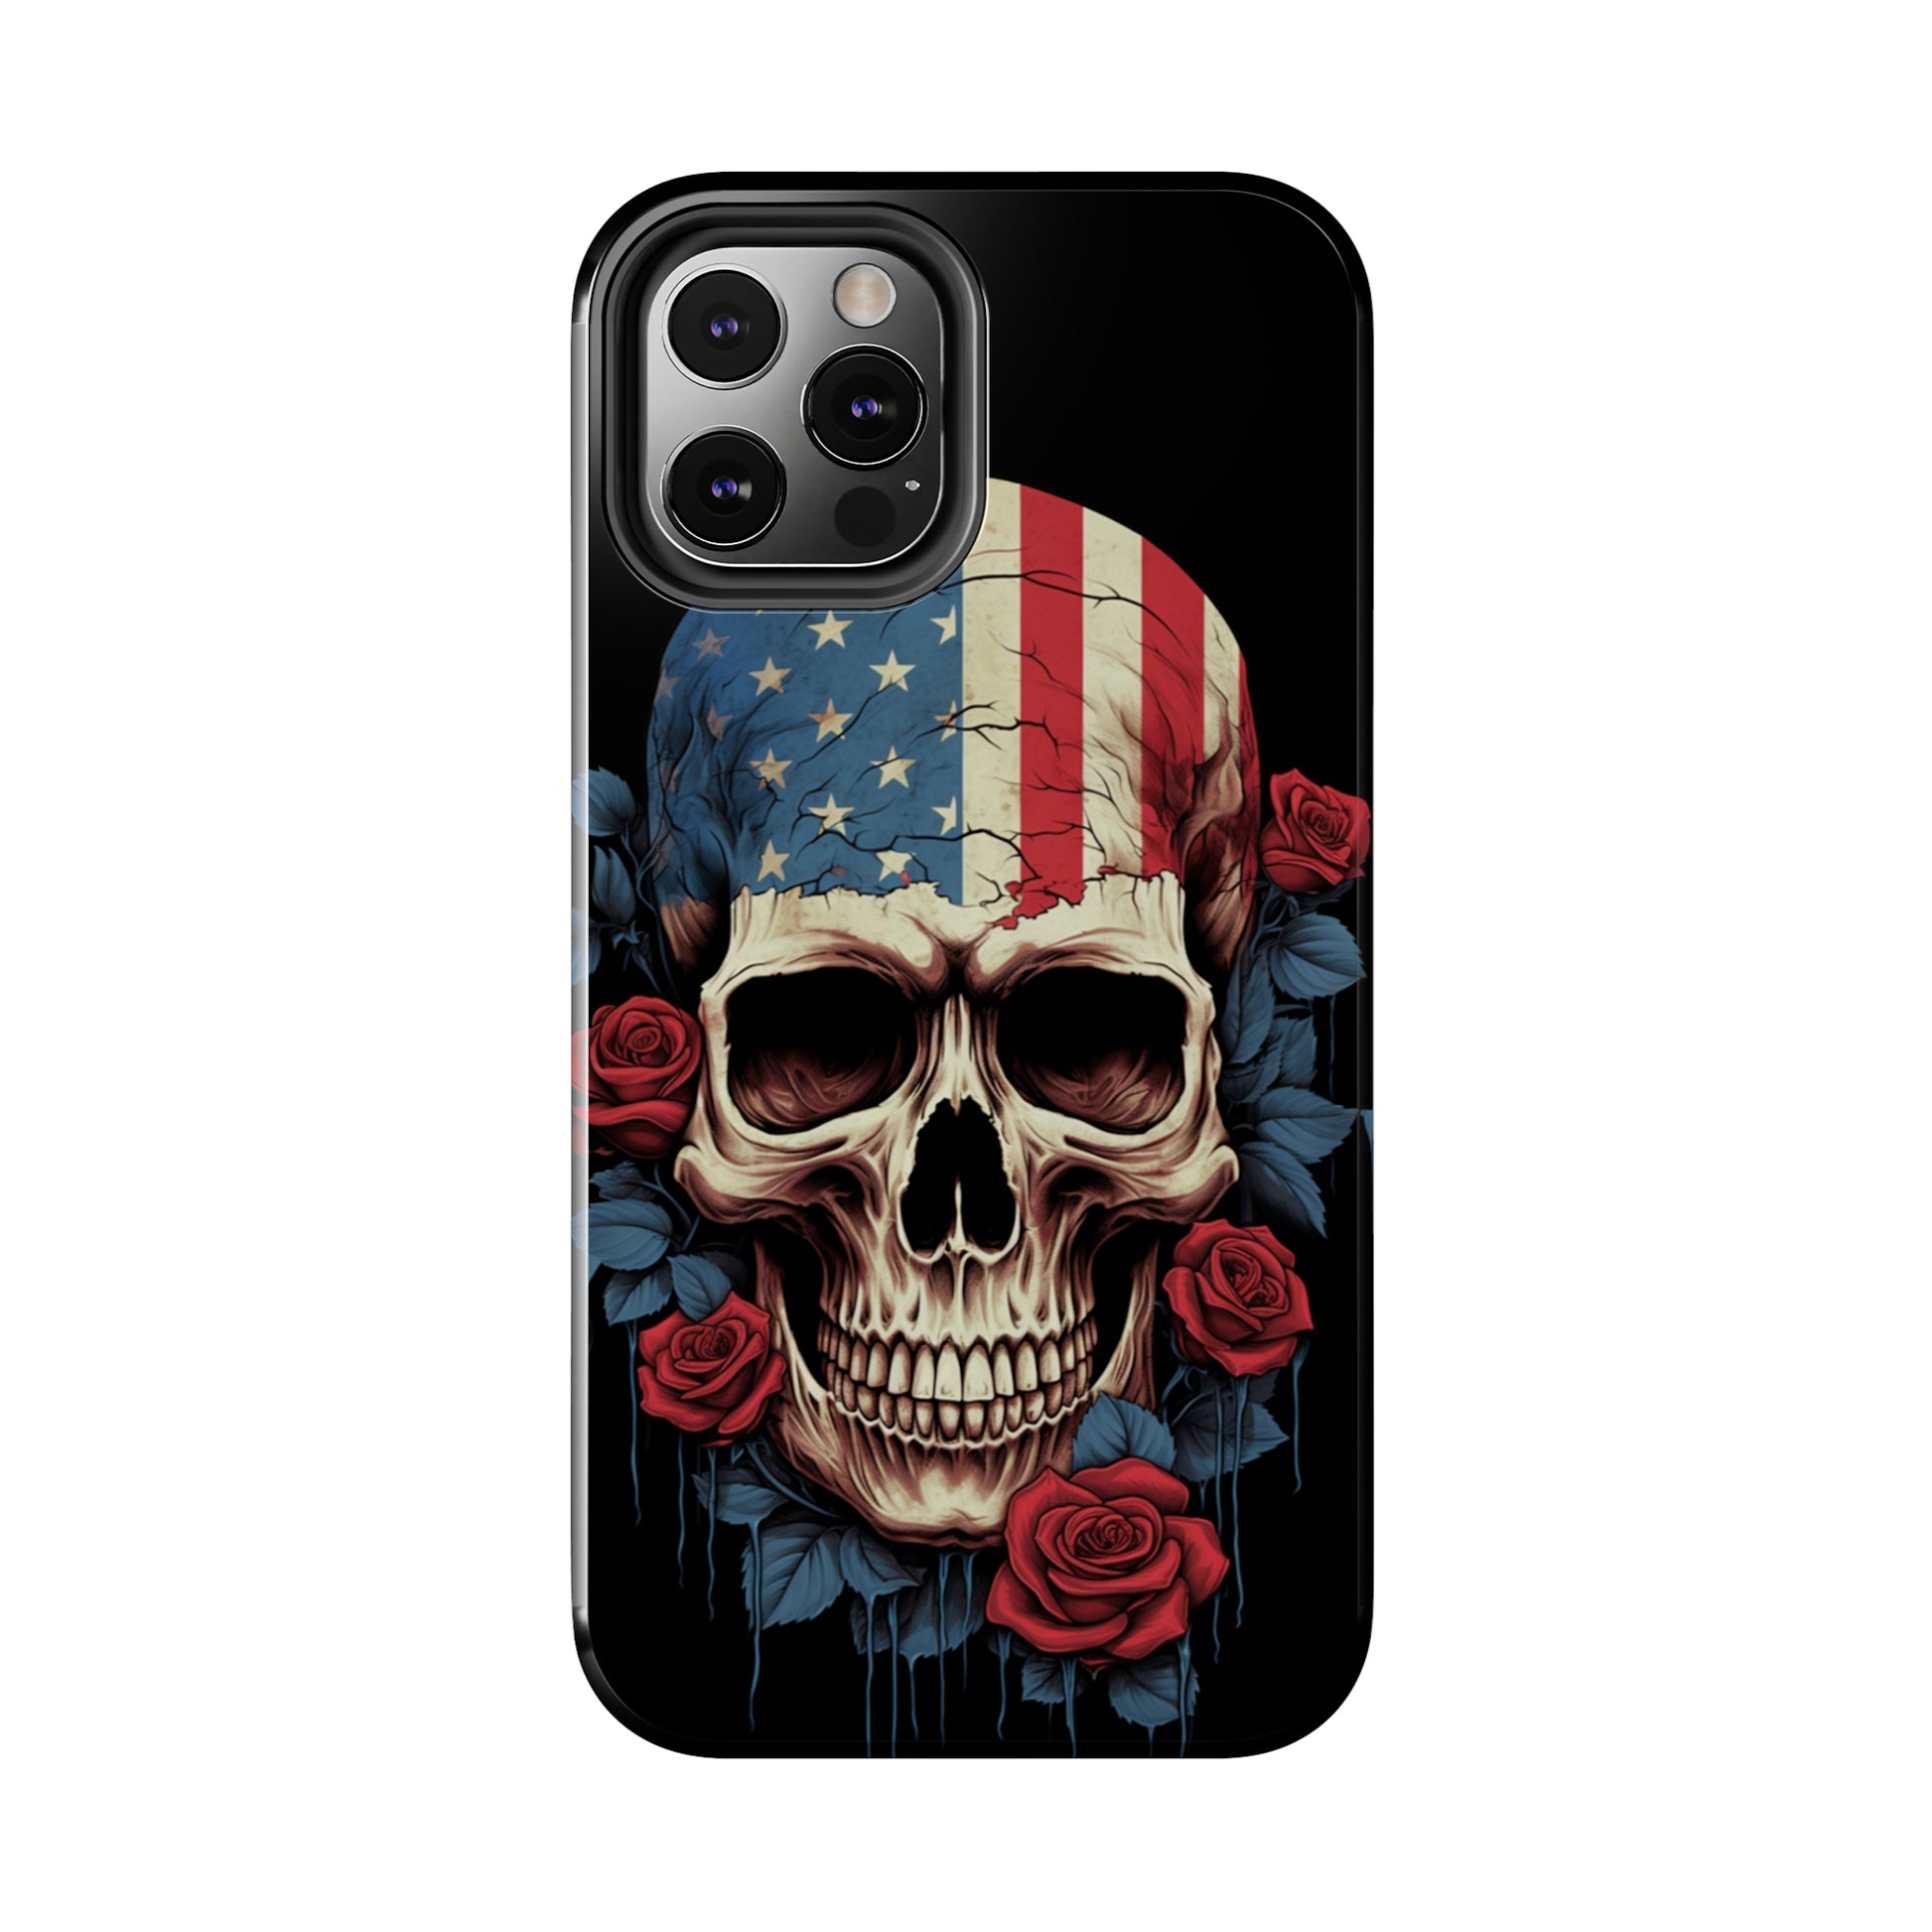 iPhone XR and iPhone 13 Pro design with bold USA colors